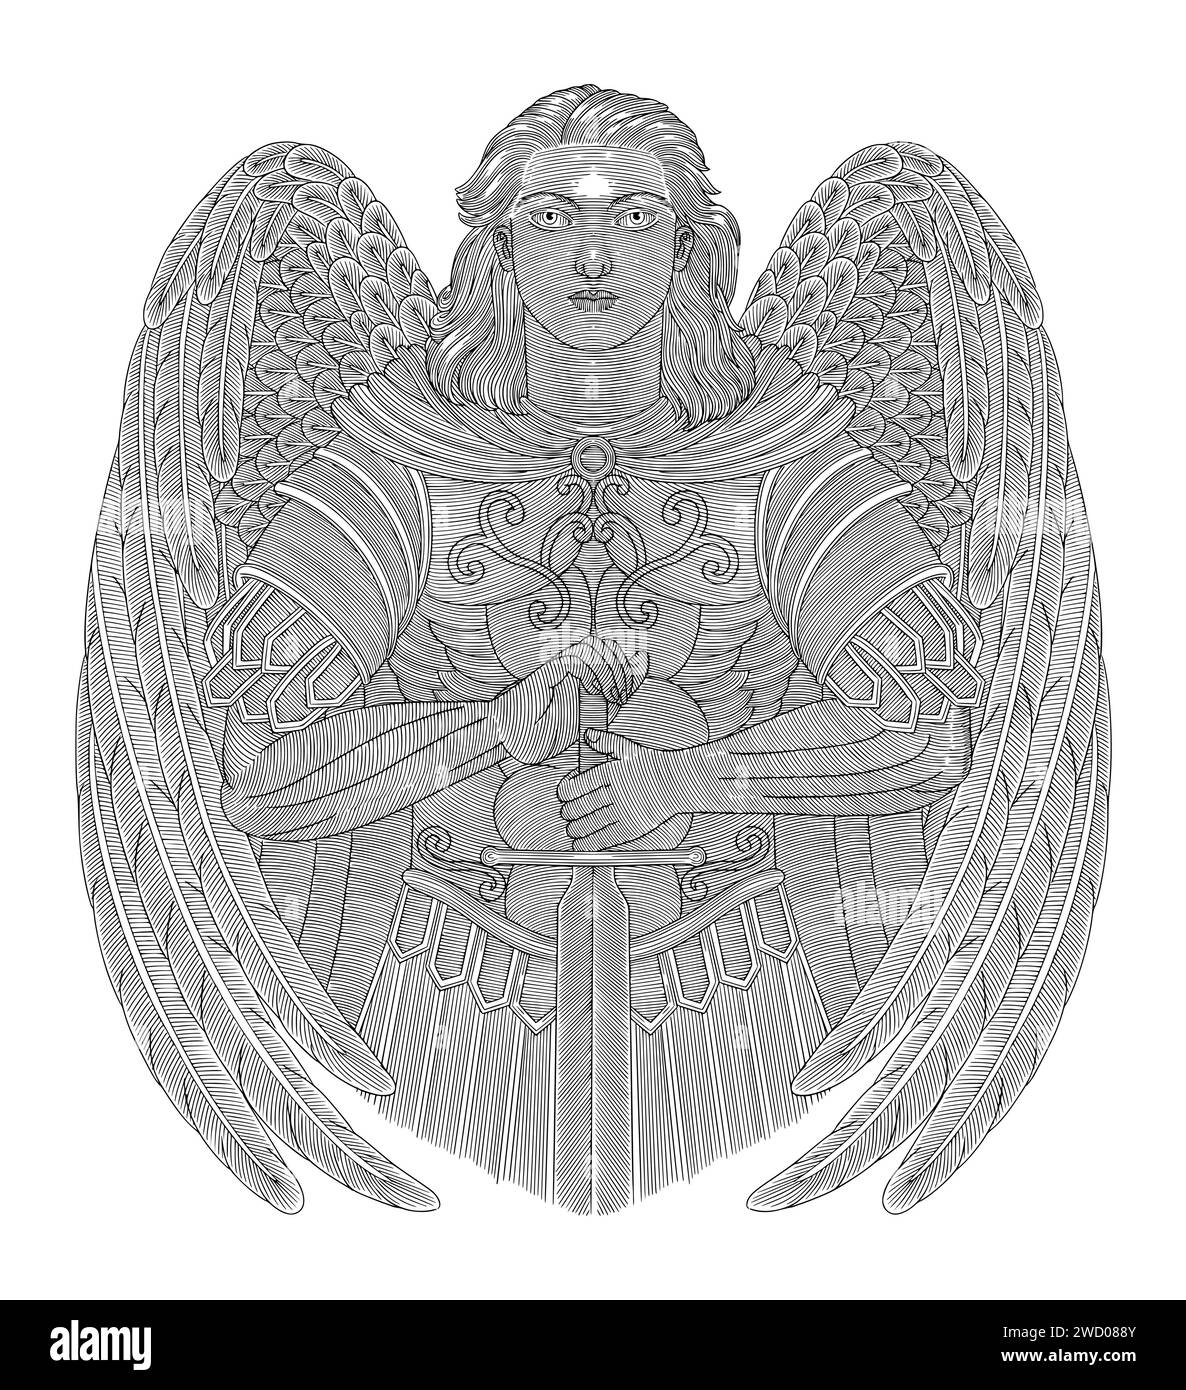 Archangel michael holding sword, Vintage engraving drawing style illustration Stock Vector